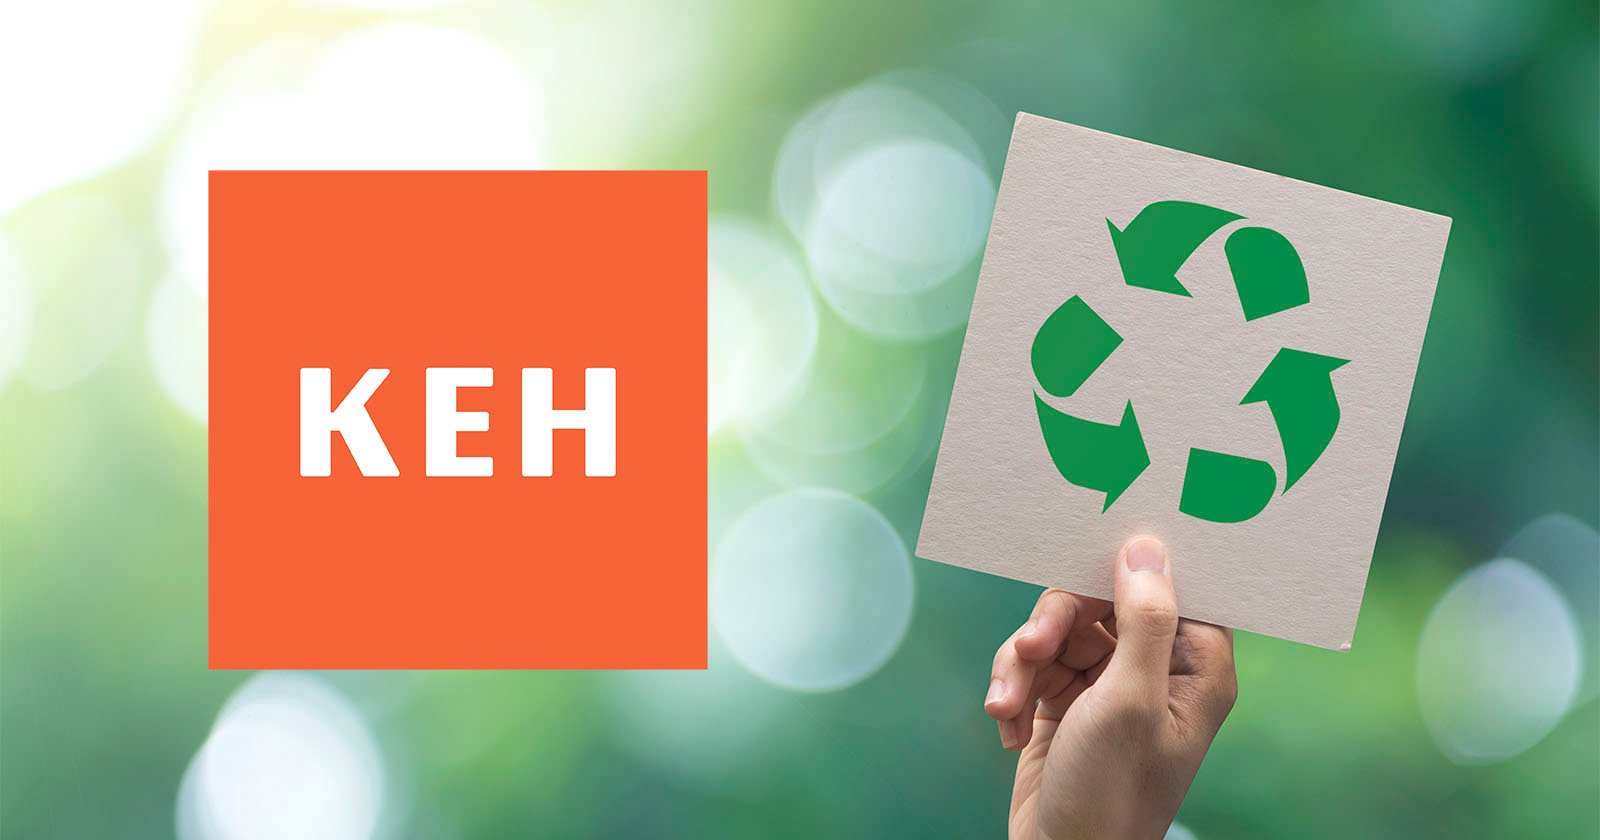 KEH’s ‘Better Than New’ Campaign Highlights Environmental Benefits of Buying Used